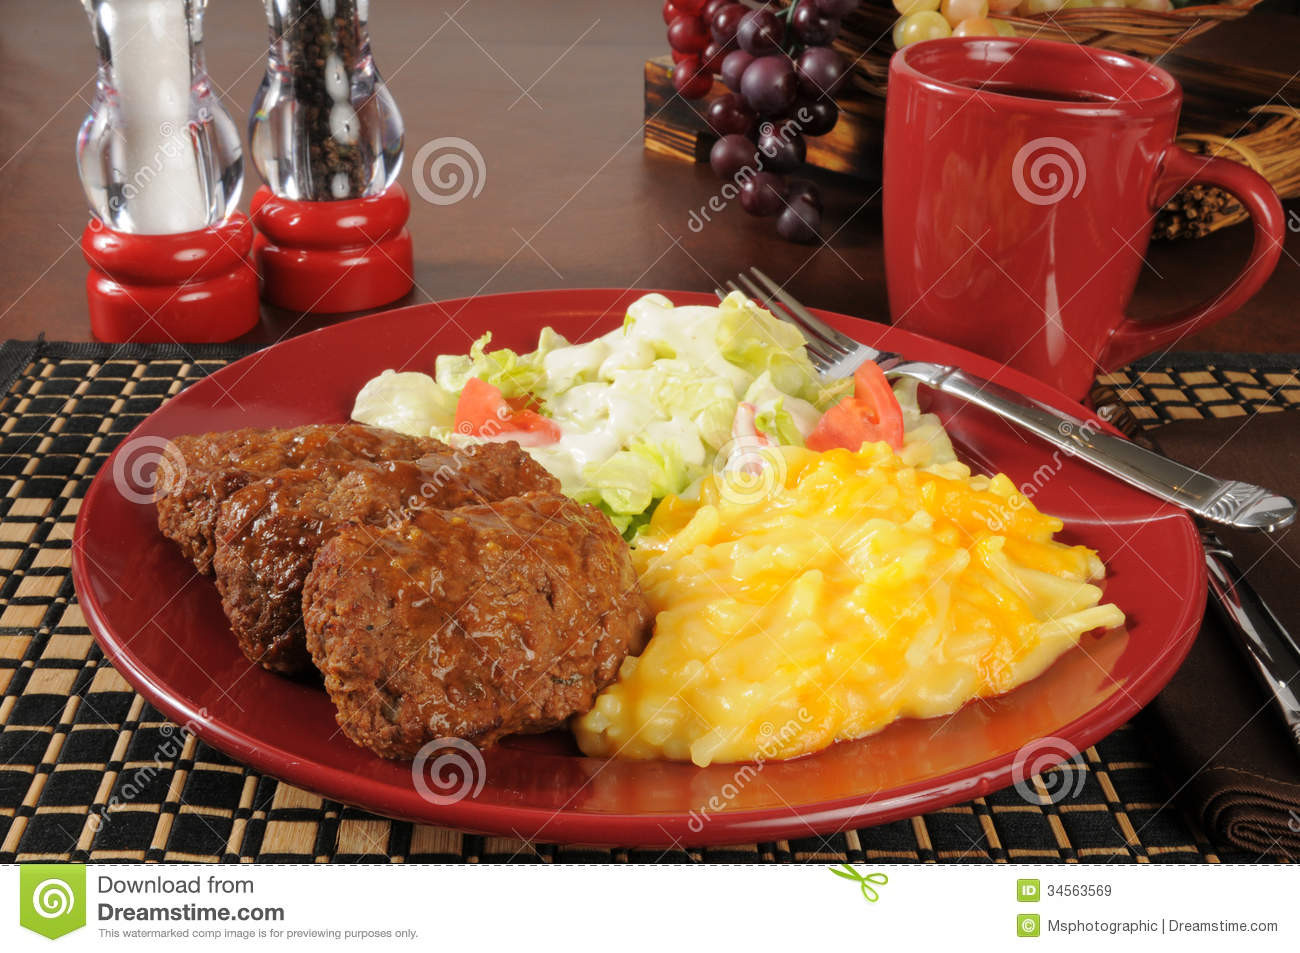 Southern Meatloaf Recipe With Crackers
 Meatloaf dinner stock image Image of meat potatoes